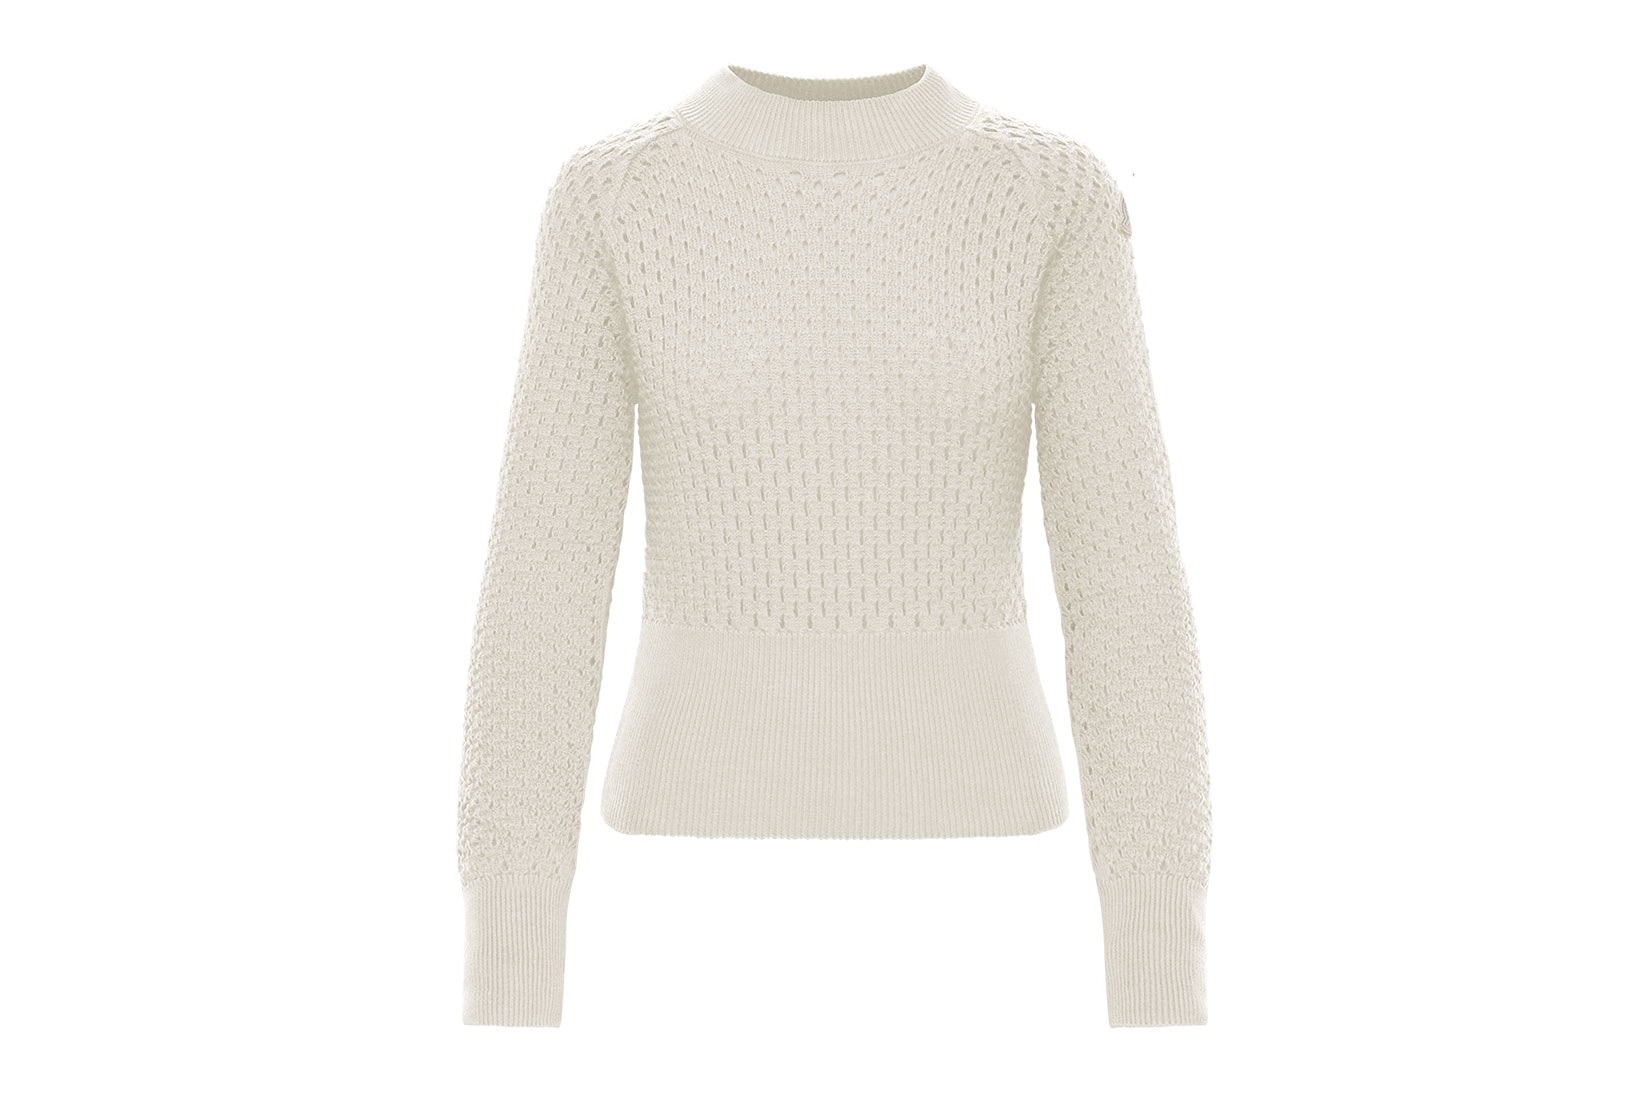 moncler womenswer the freshener ss21 spring summer 2021 collection sweater knitwear